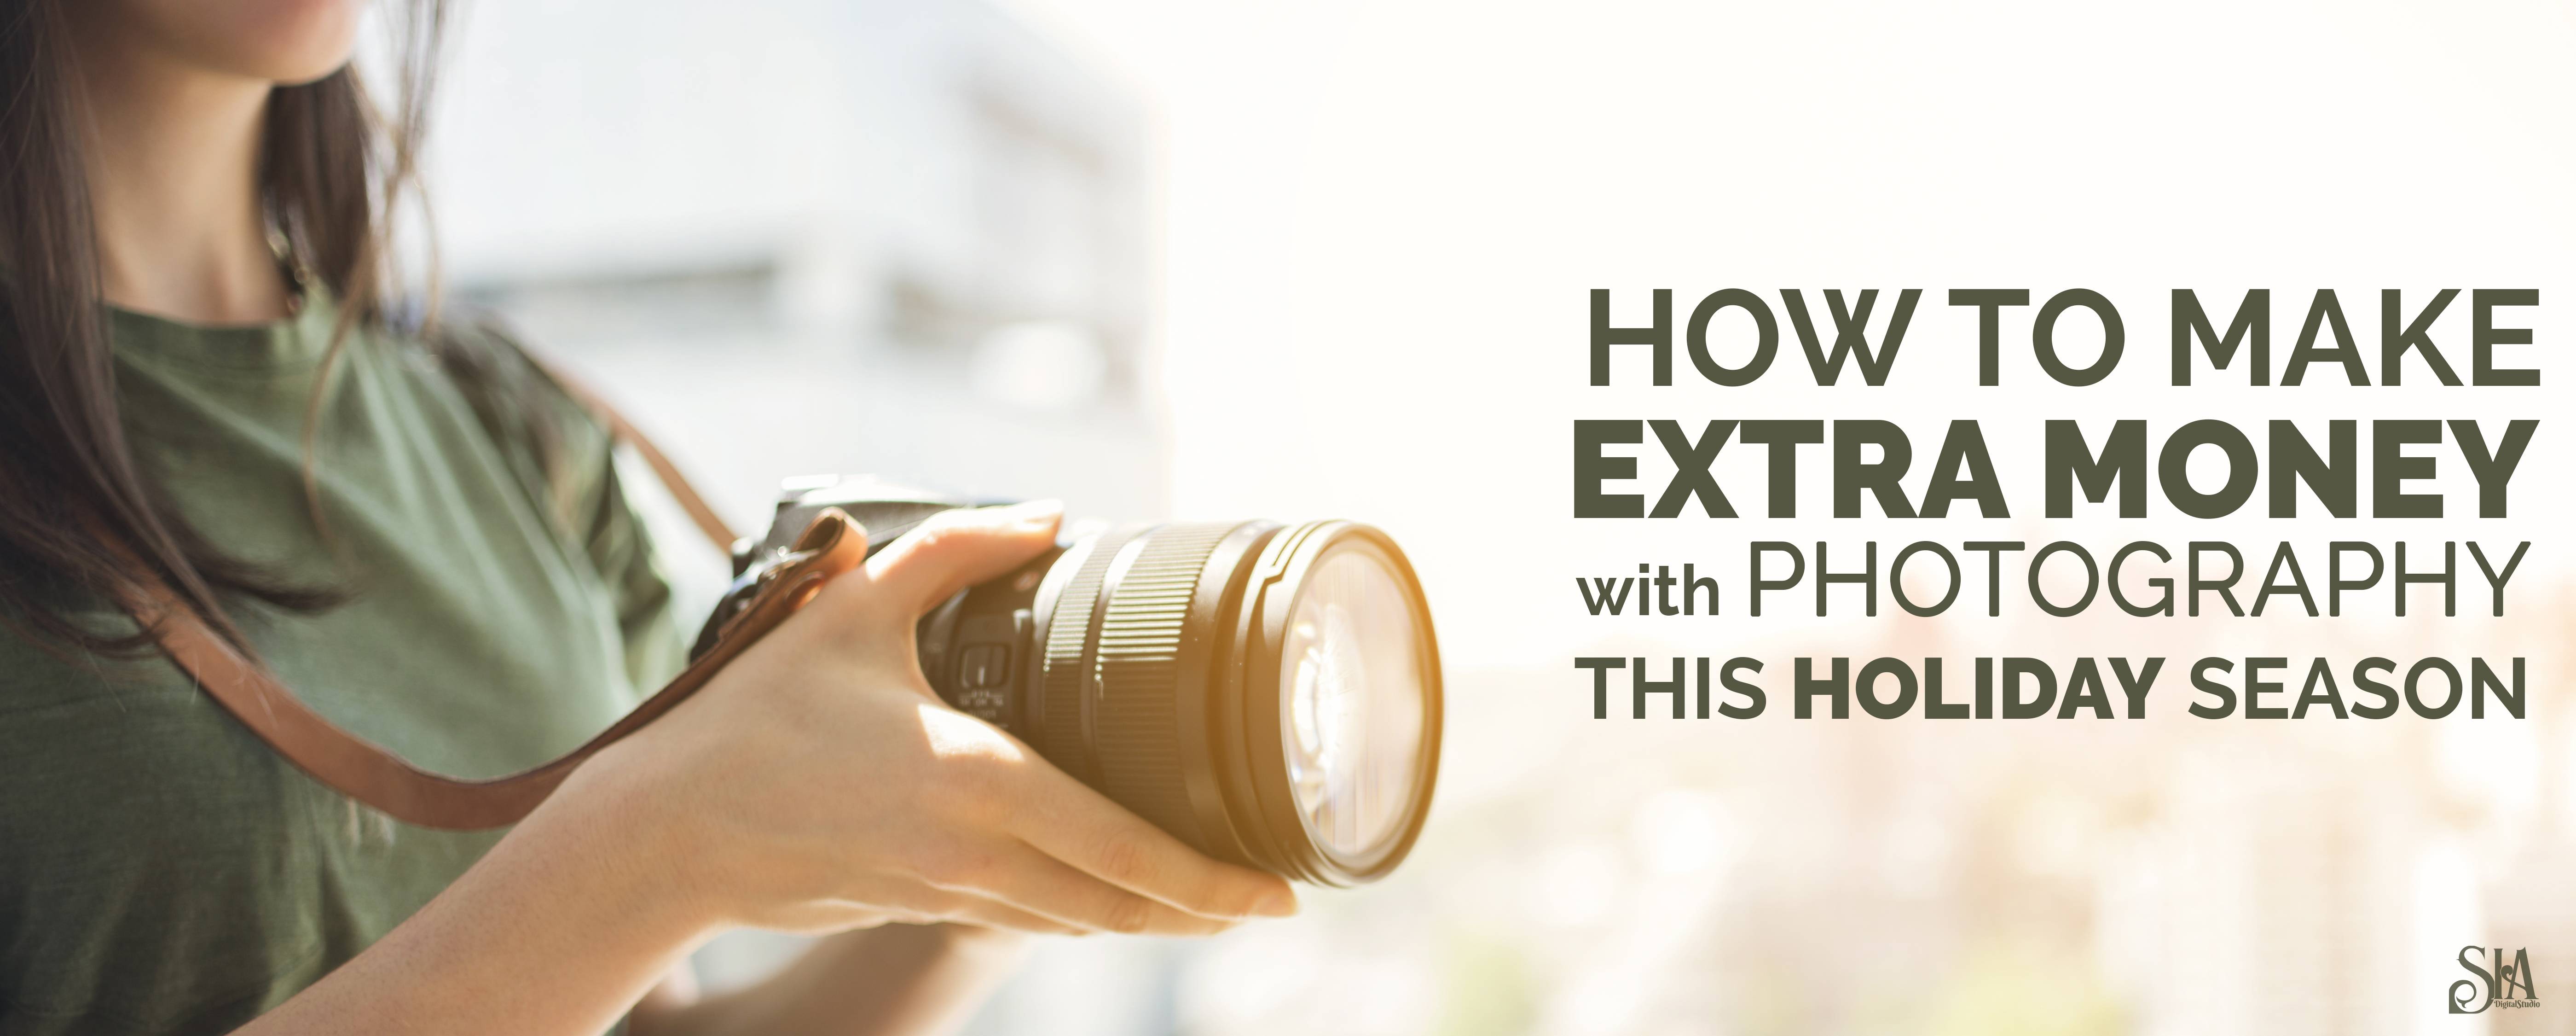 How to Make Extra Money with Photography This Holiday Season?